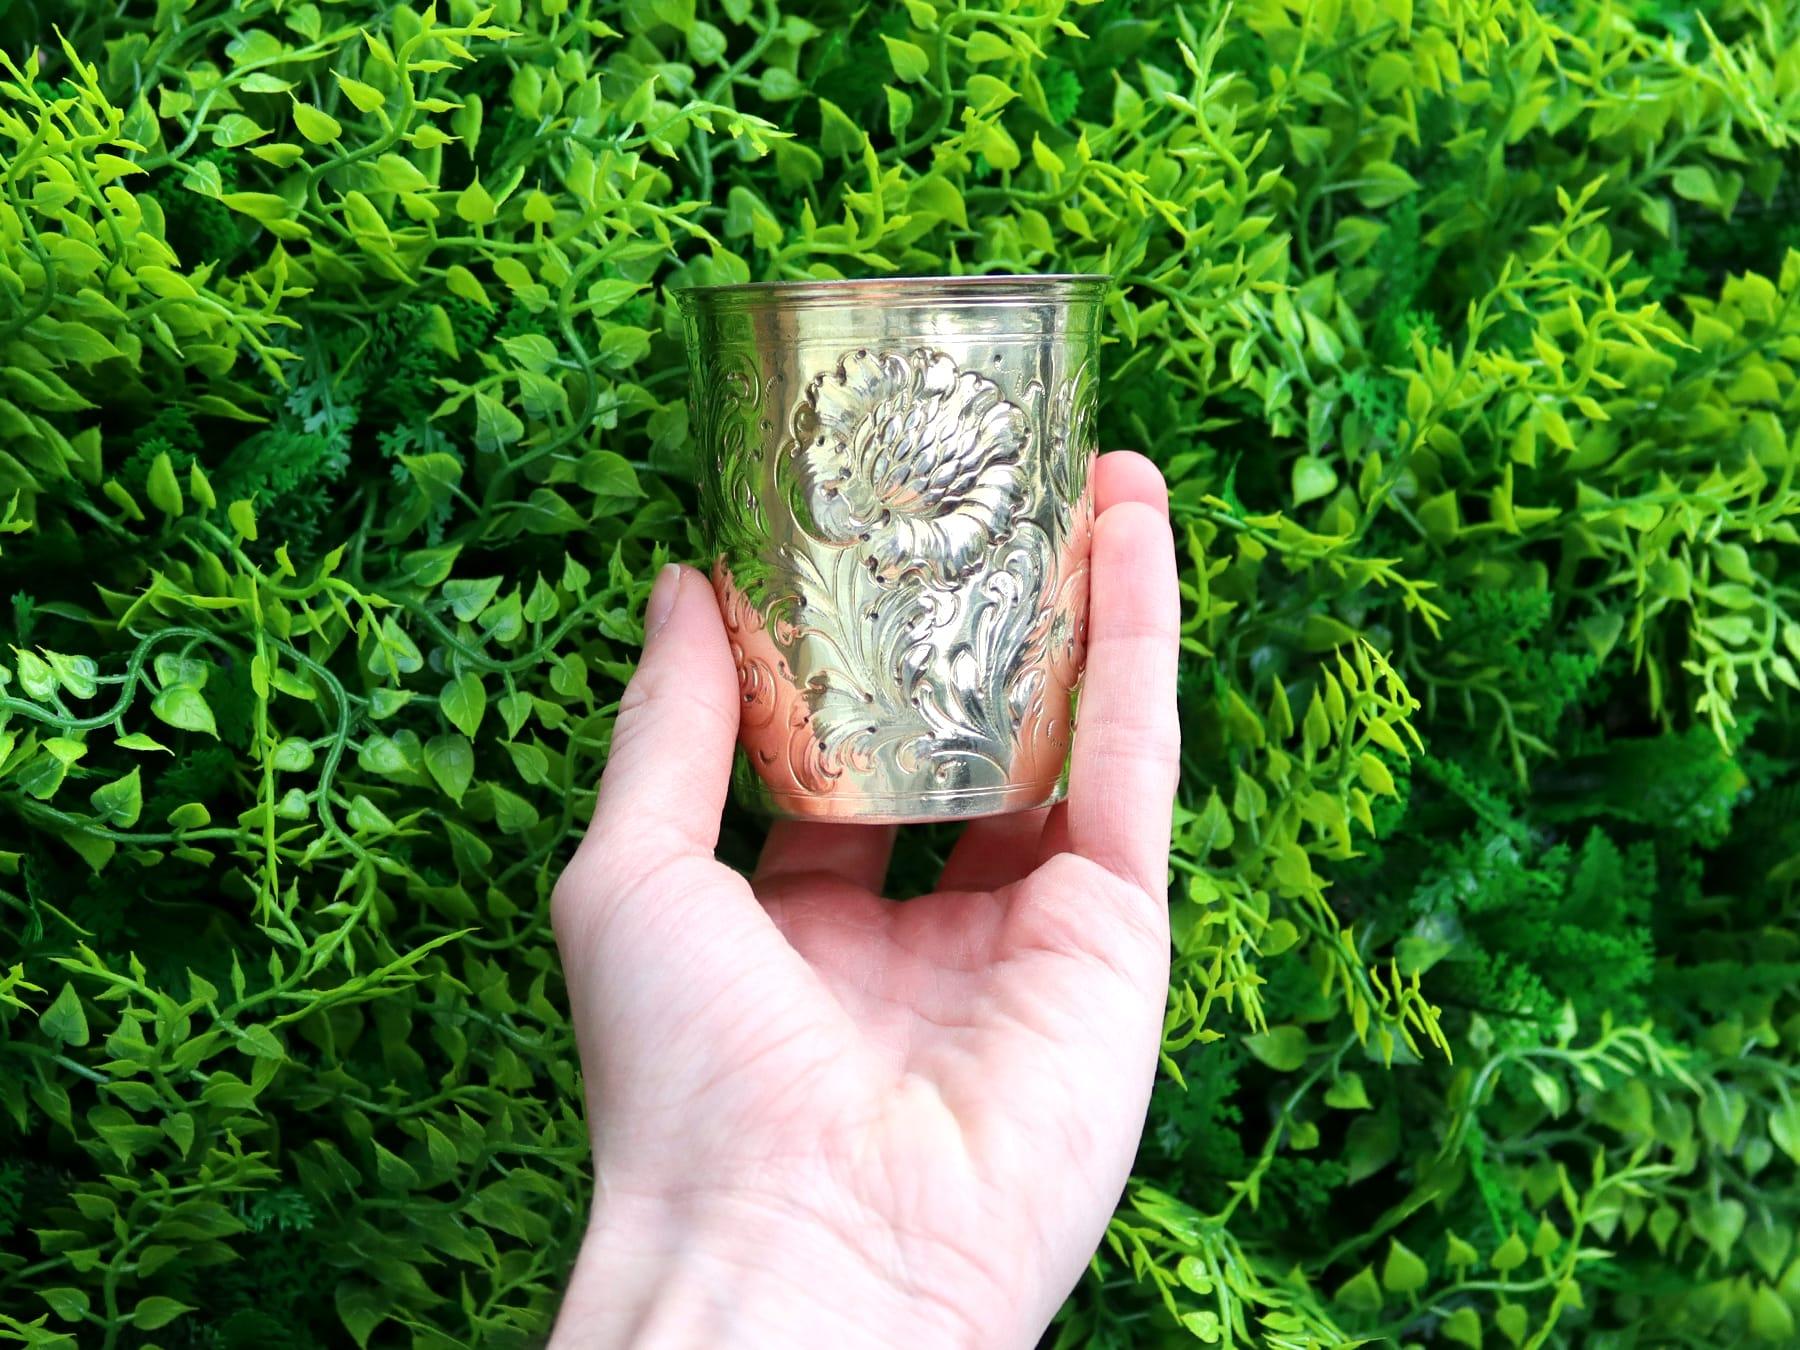 An exceptional, fine and impressive 18th century, German silver gilt beaker made in Hanau; part of our continental silverware collection.

This exceptional antique German beaker has a tapering cylindrical form.

The surface of this antique